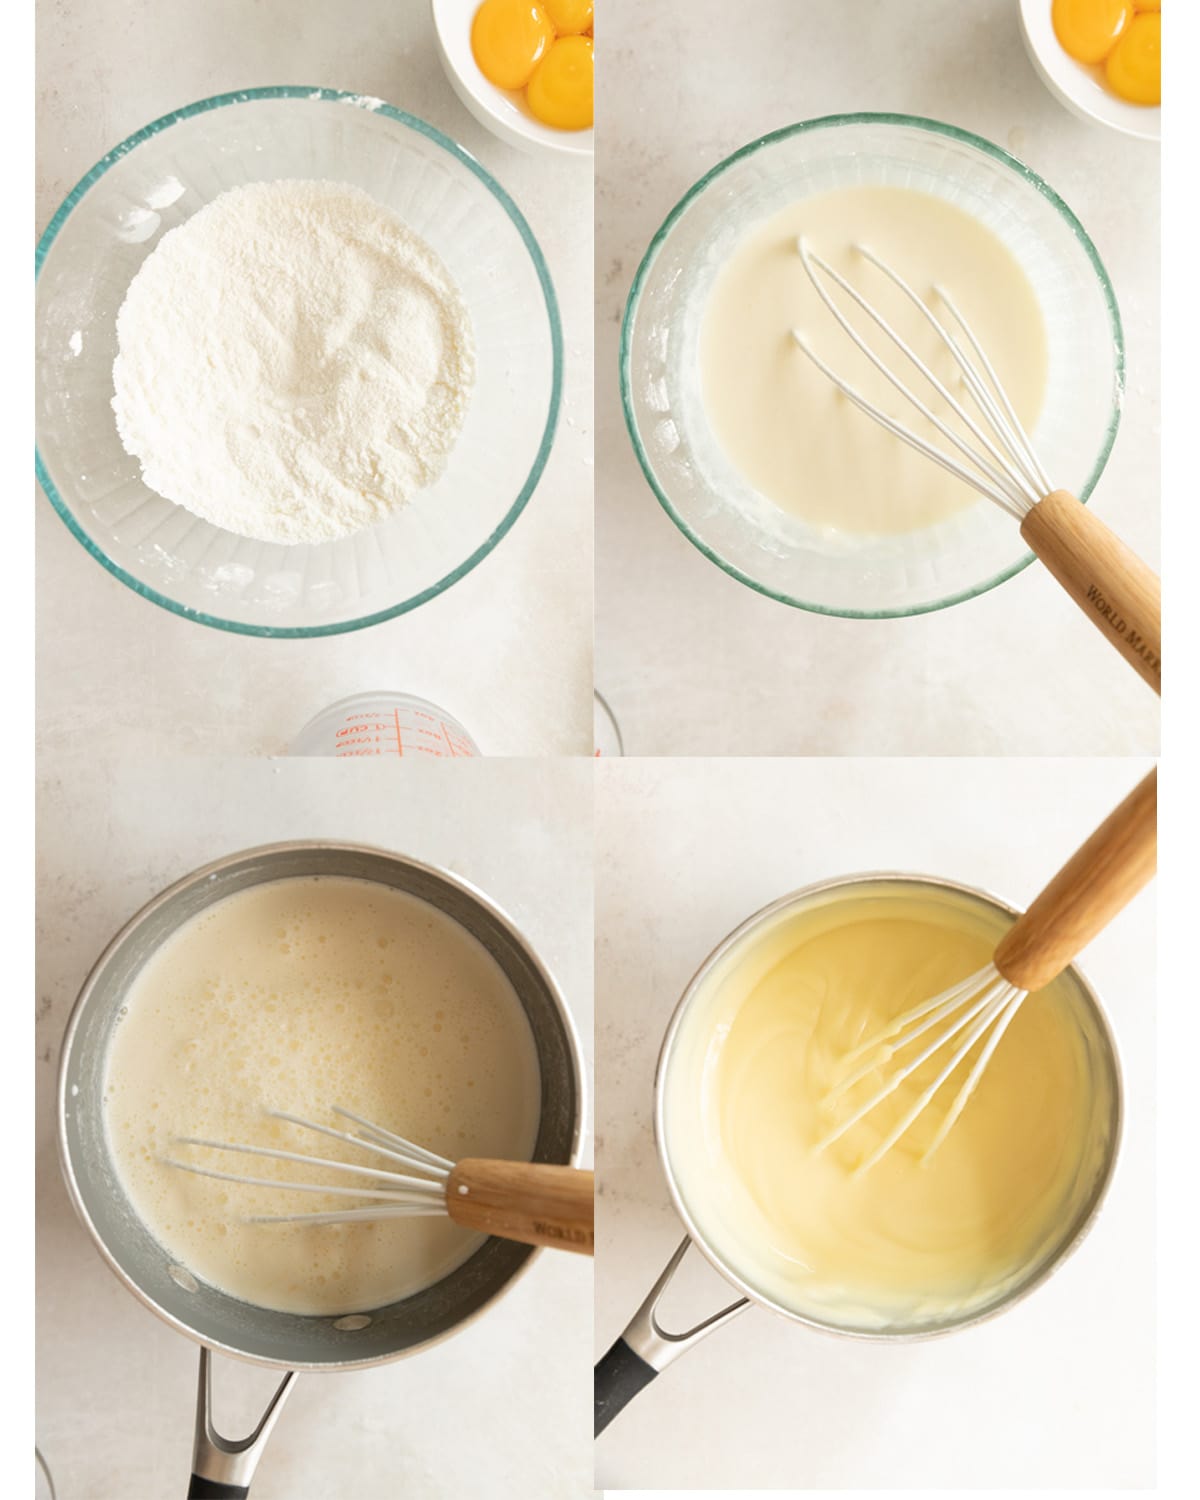 process images showing how to make and cook the vanilla pudding. 